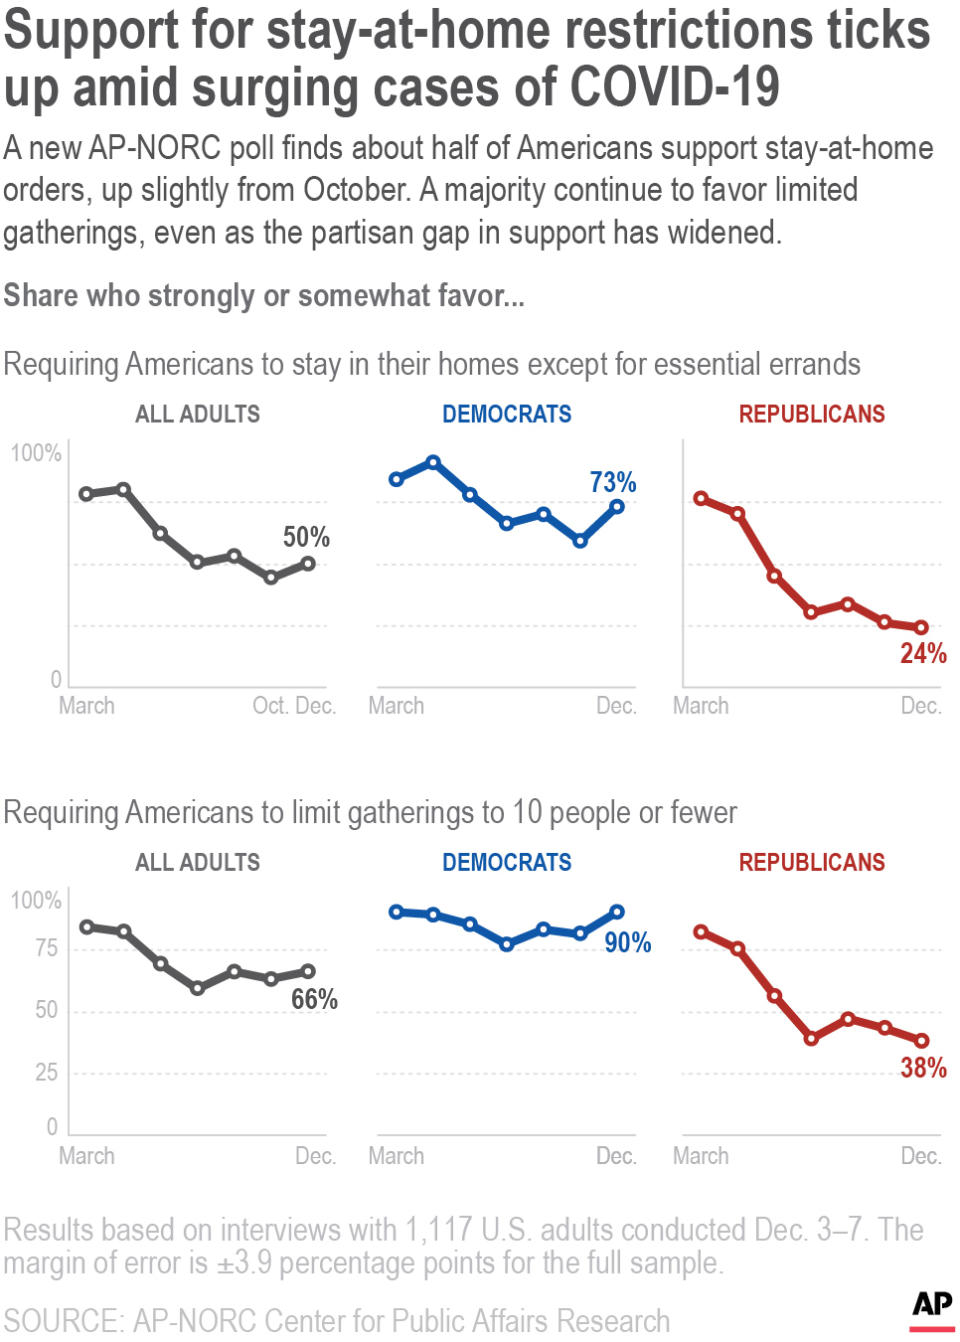 A new AP-NORC poll finds about half of Americans support stay-at-home orders, up slightly from October. A majority continue to favor limited gatherings, even as the partisan gap in support has widened.